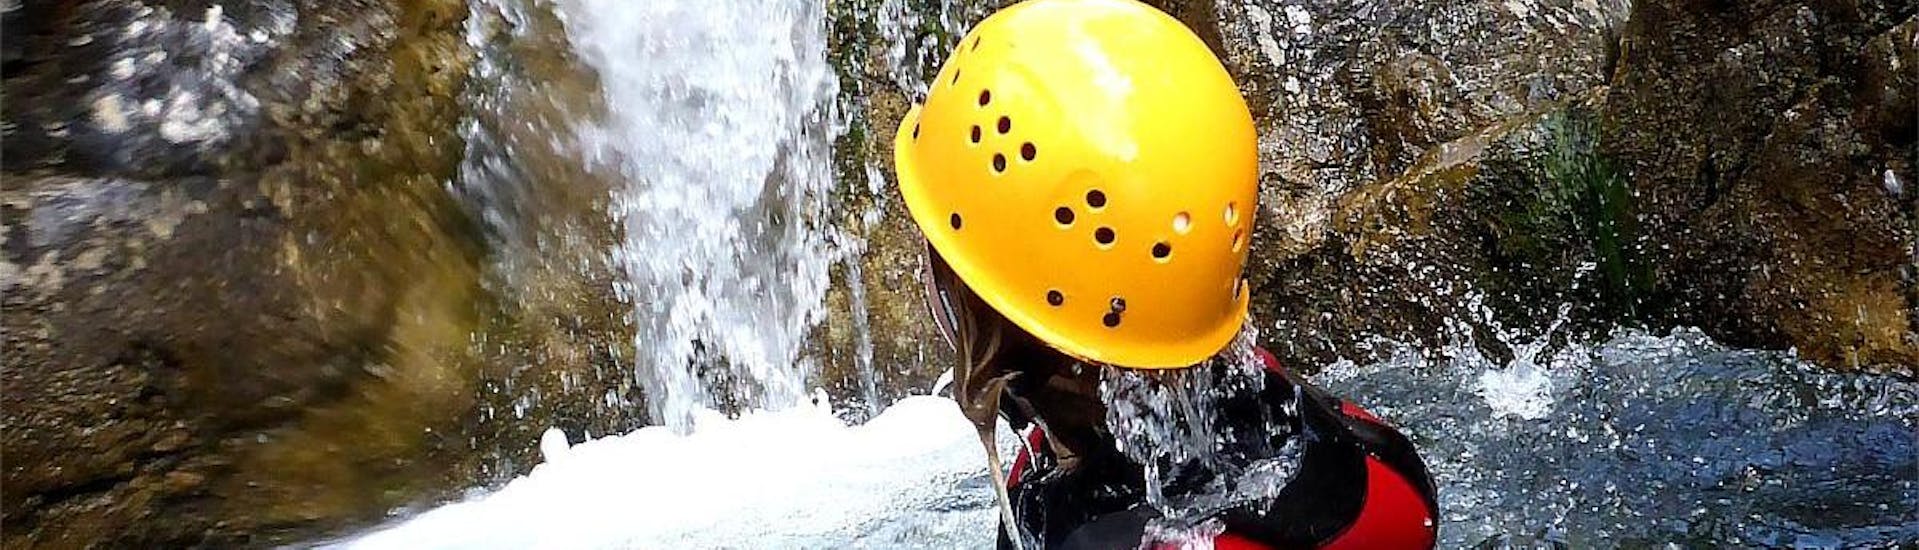 Canyoning per esperti a Sonthofen - Bodensee.